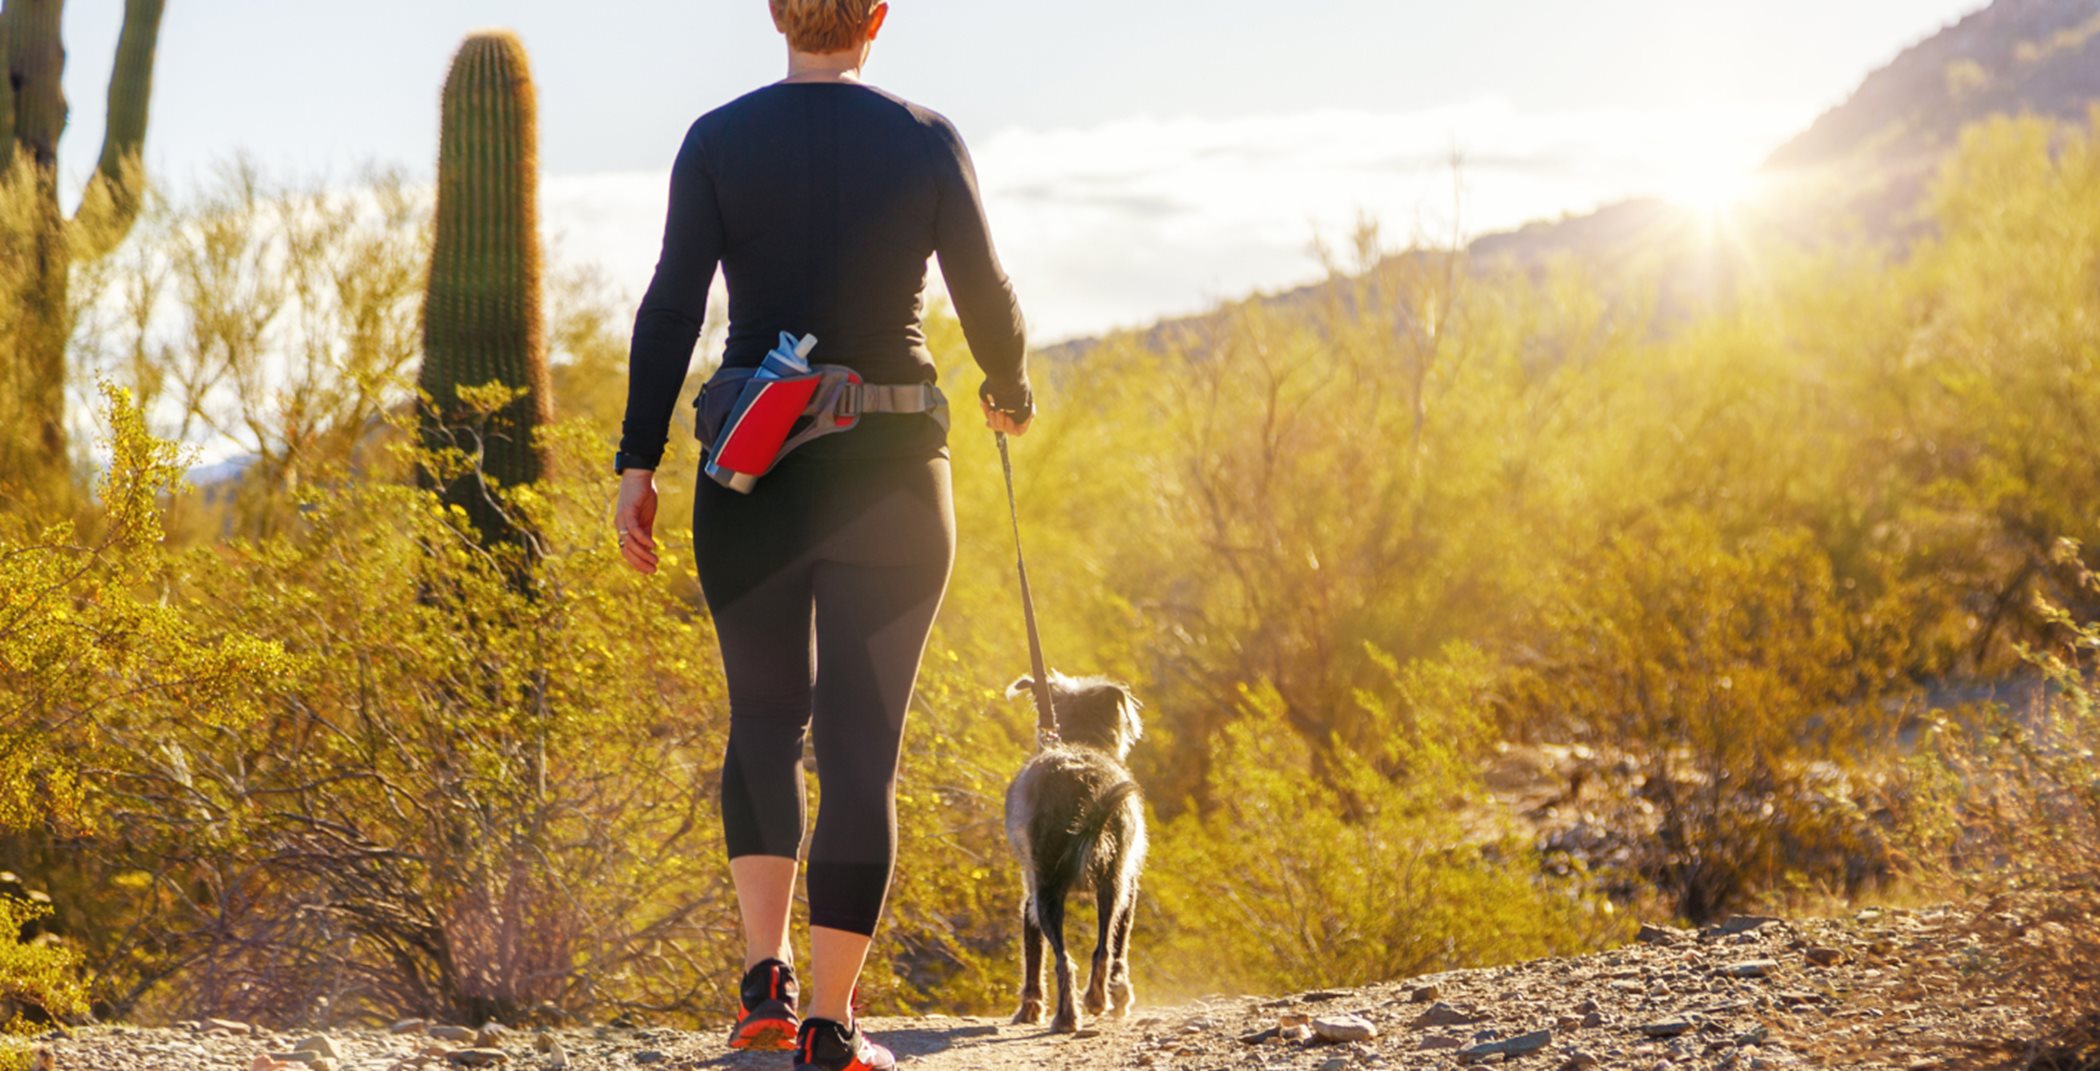 Women and dog hiking on a desert path